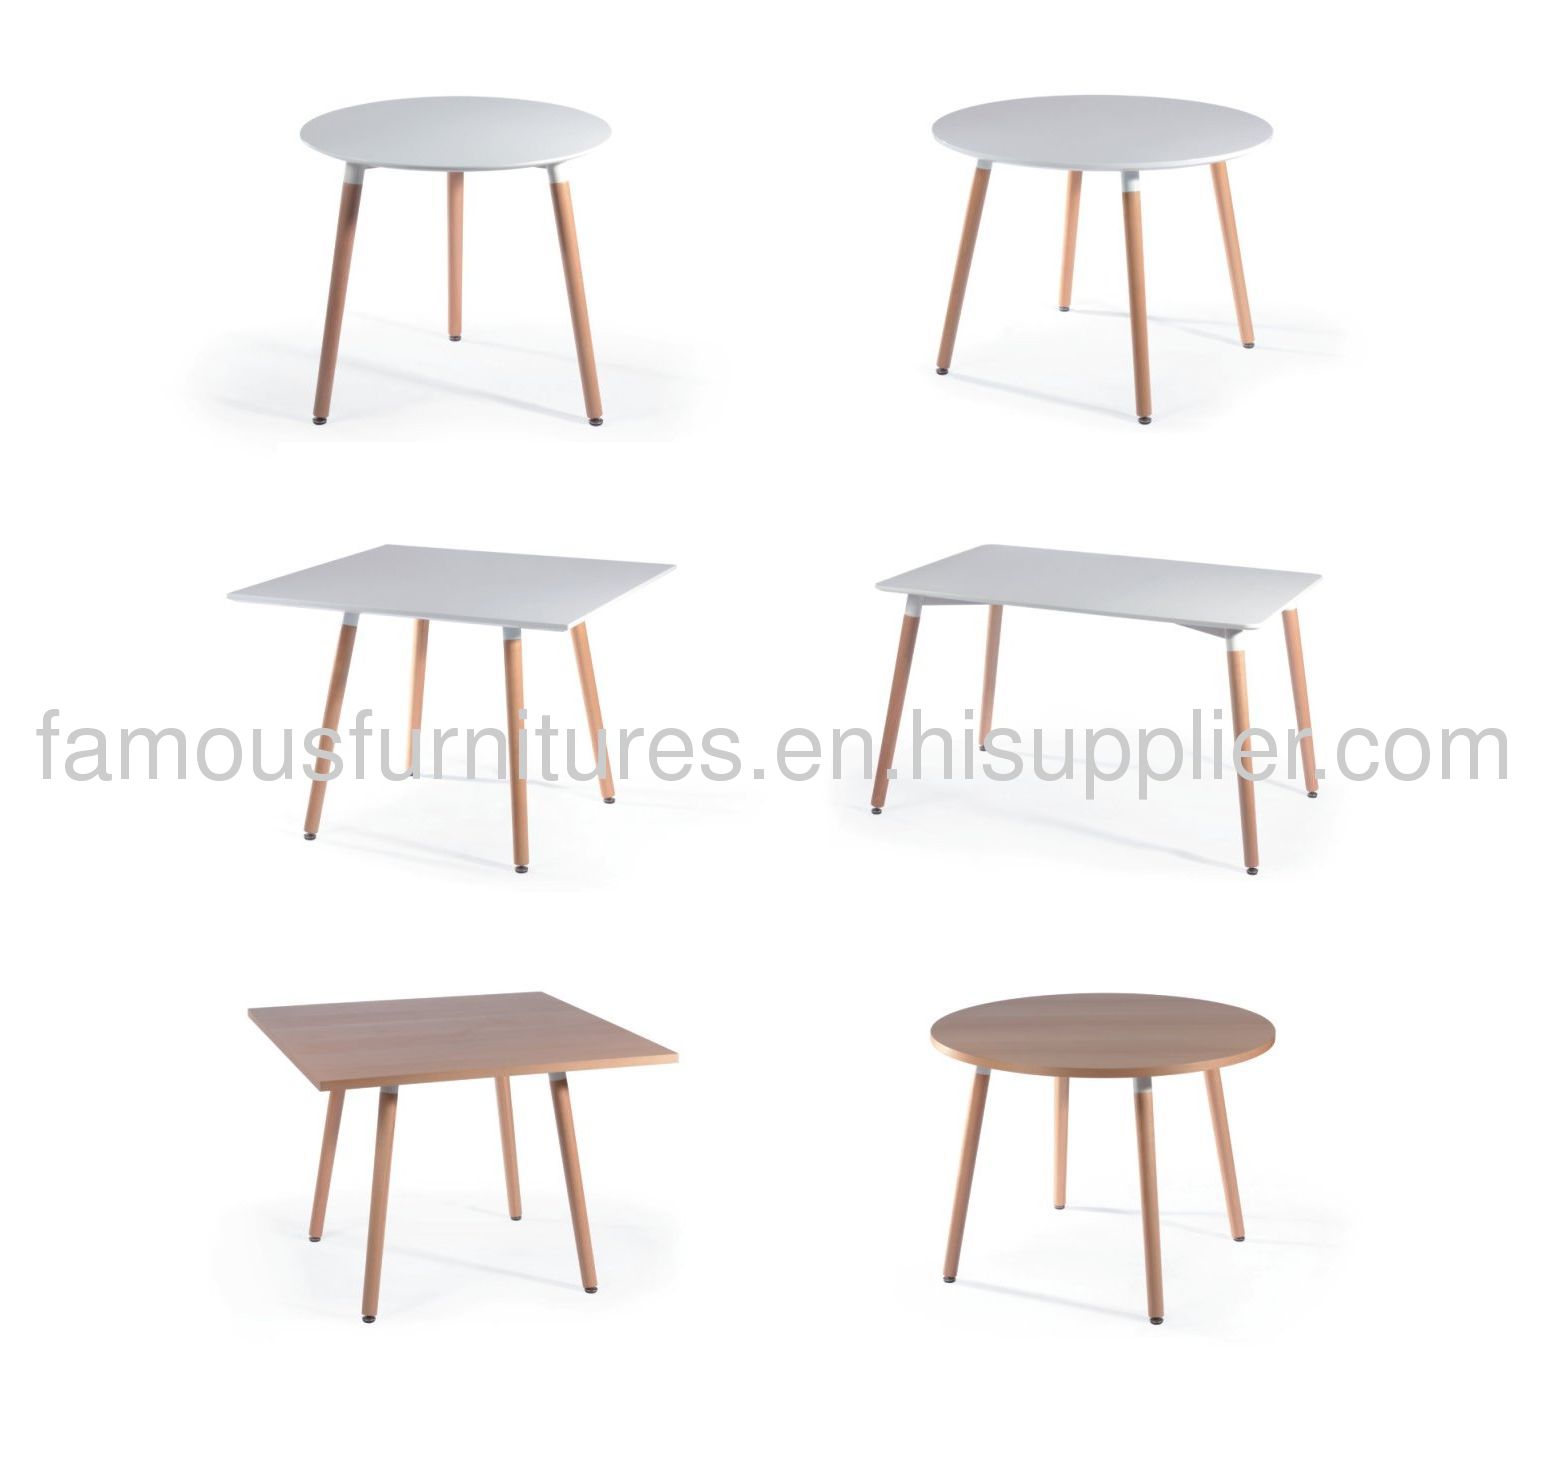 classic fine non-foldable wooden round dining tables